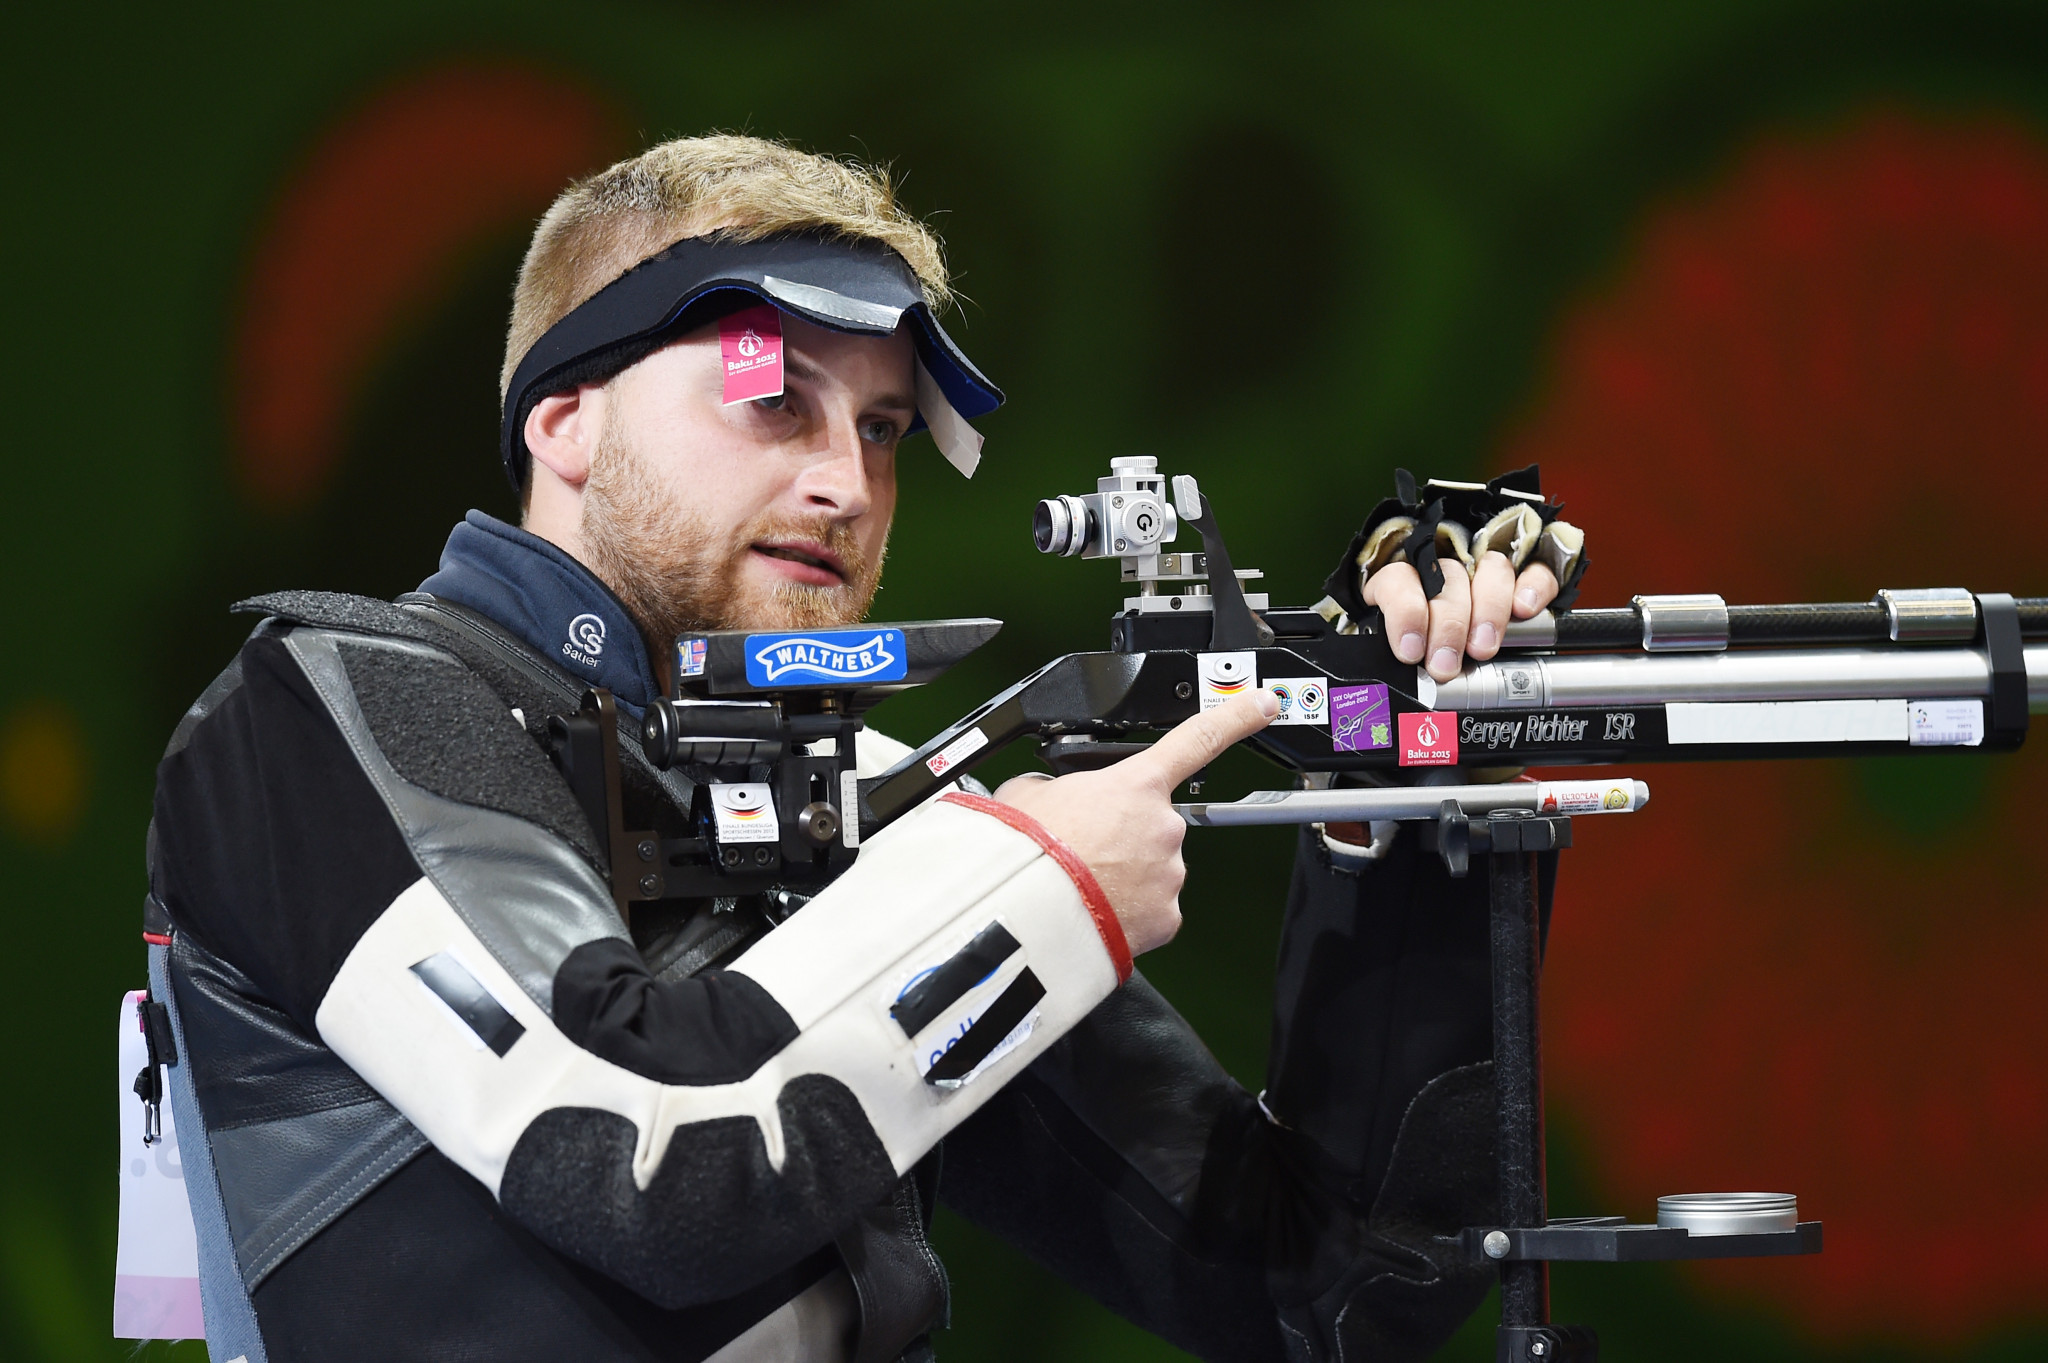 Bajos and Richter lead qualification round at ISSF World Cup in Changwon